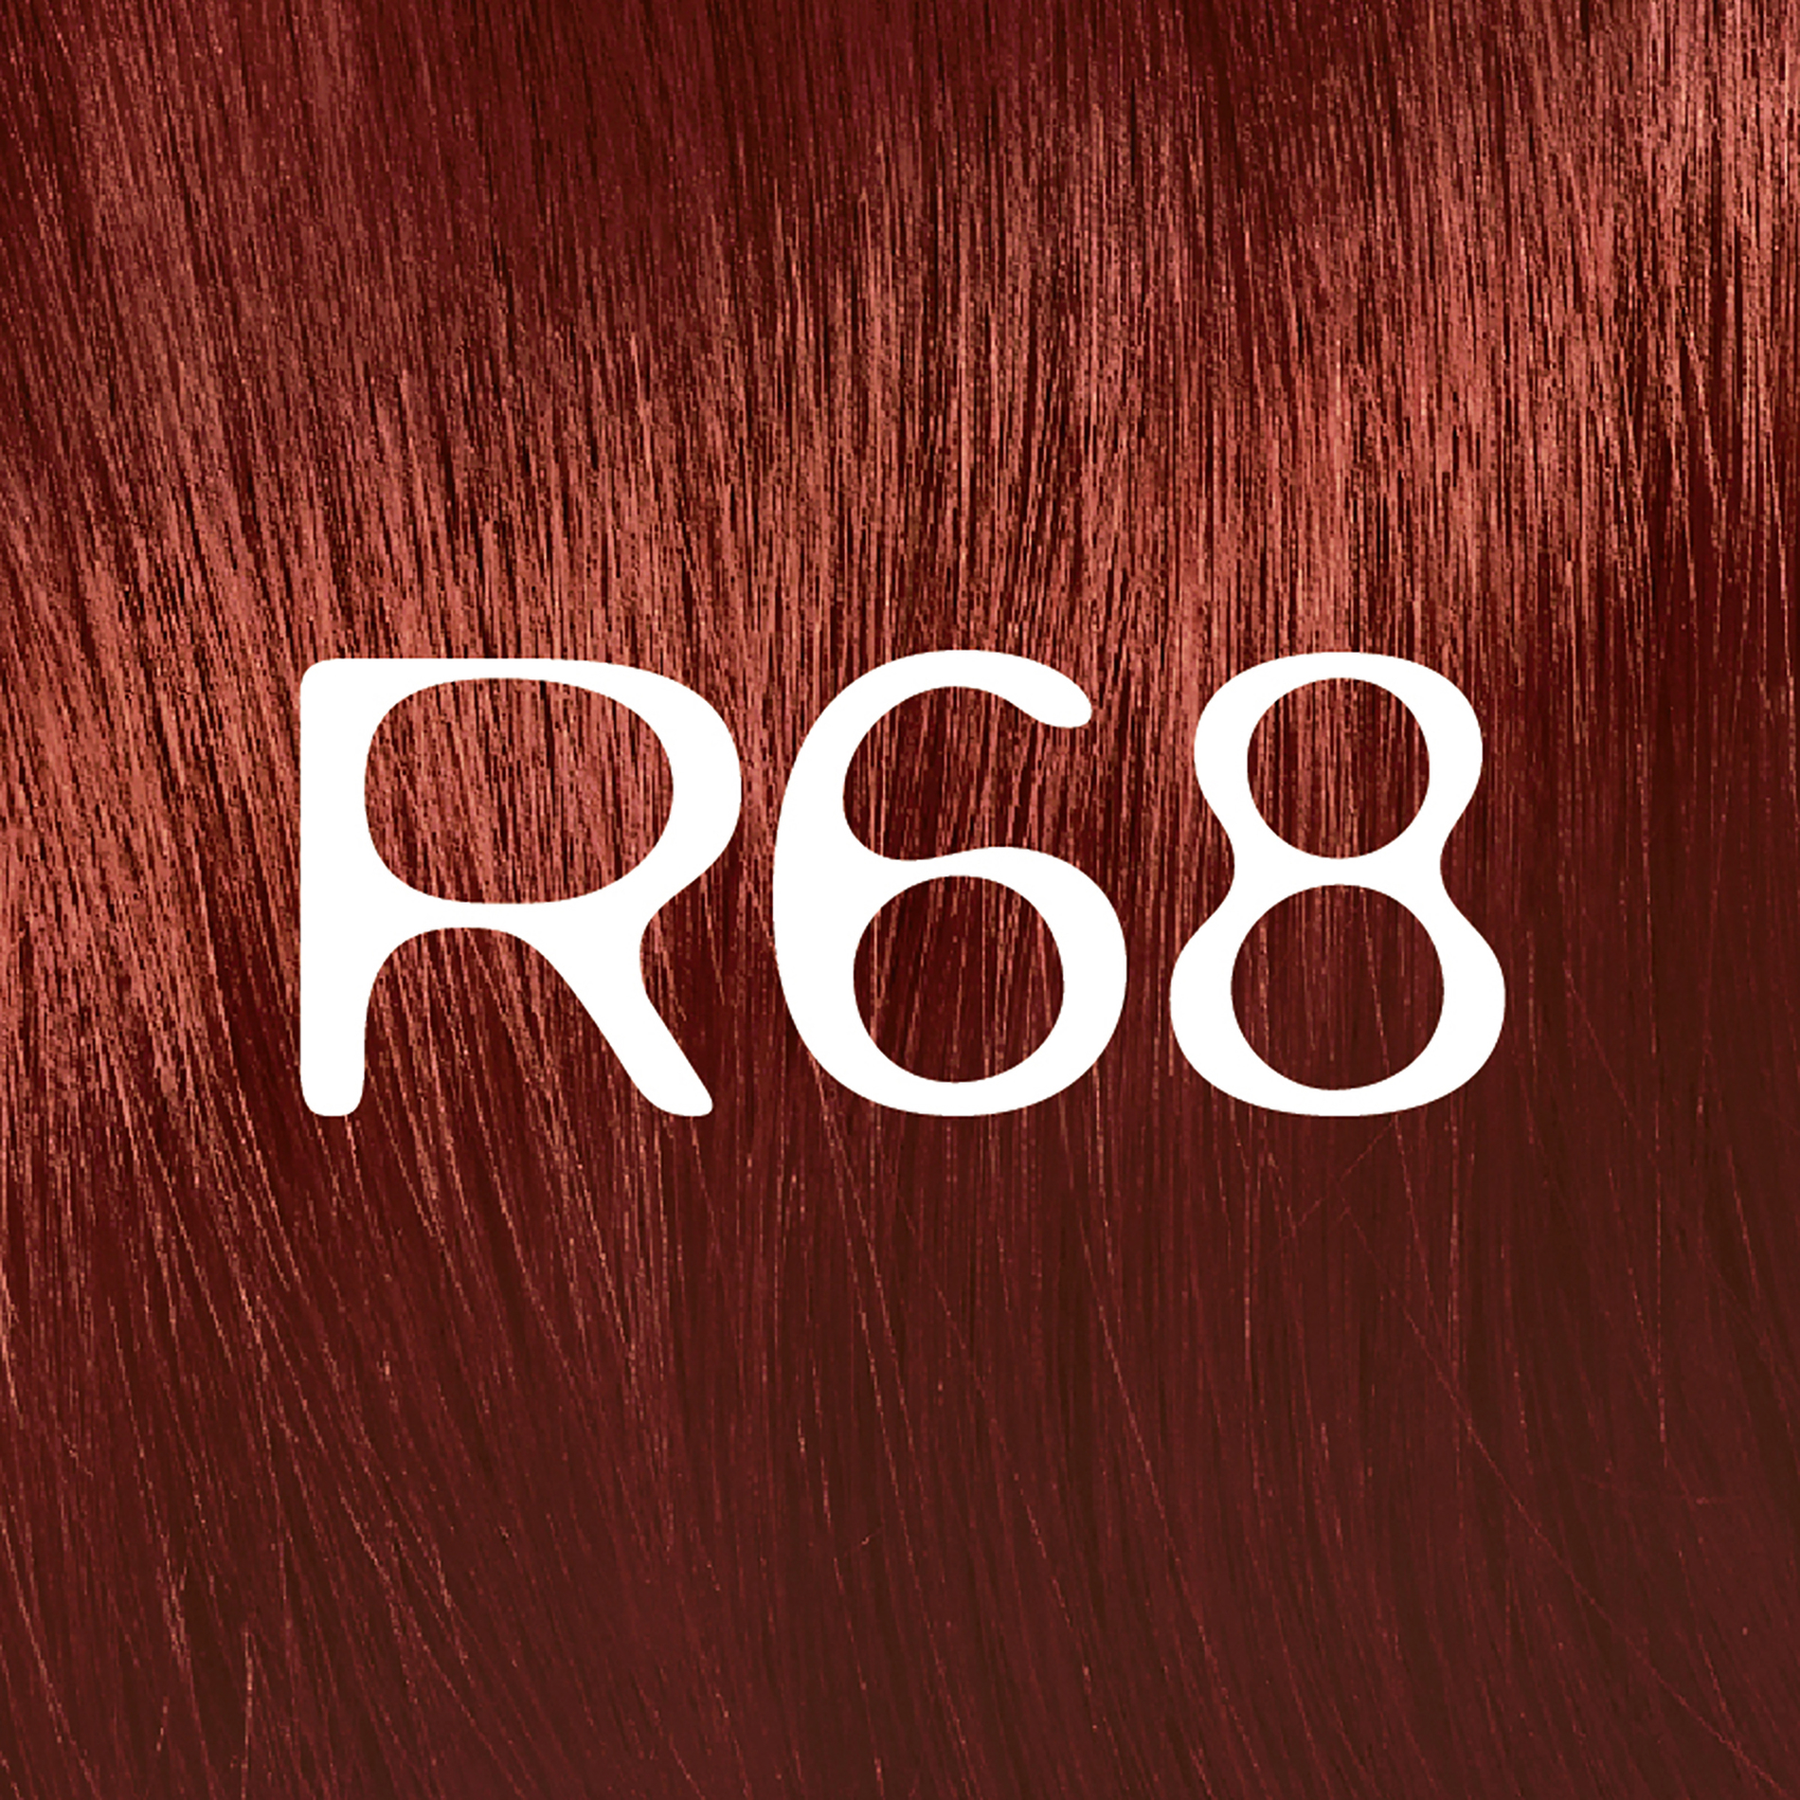 L'Oreal Paris Feria Multi-Faceted Shimmering Permanent Hair Color Kit, R68 Ruby Rush - image 3 of 9